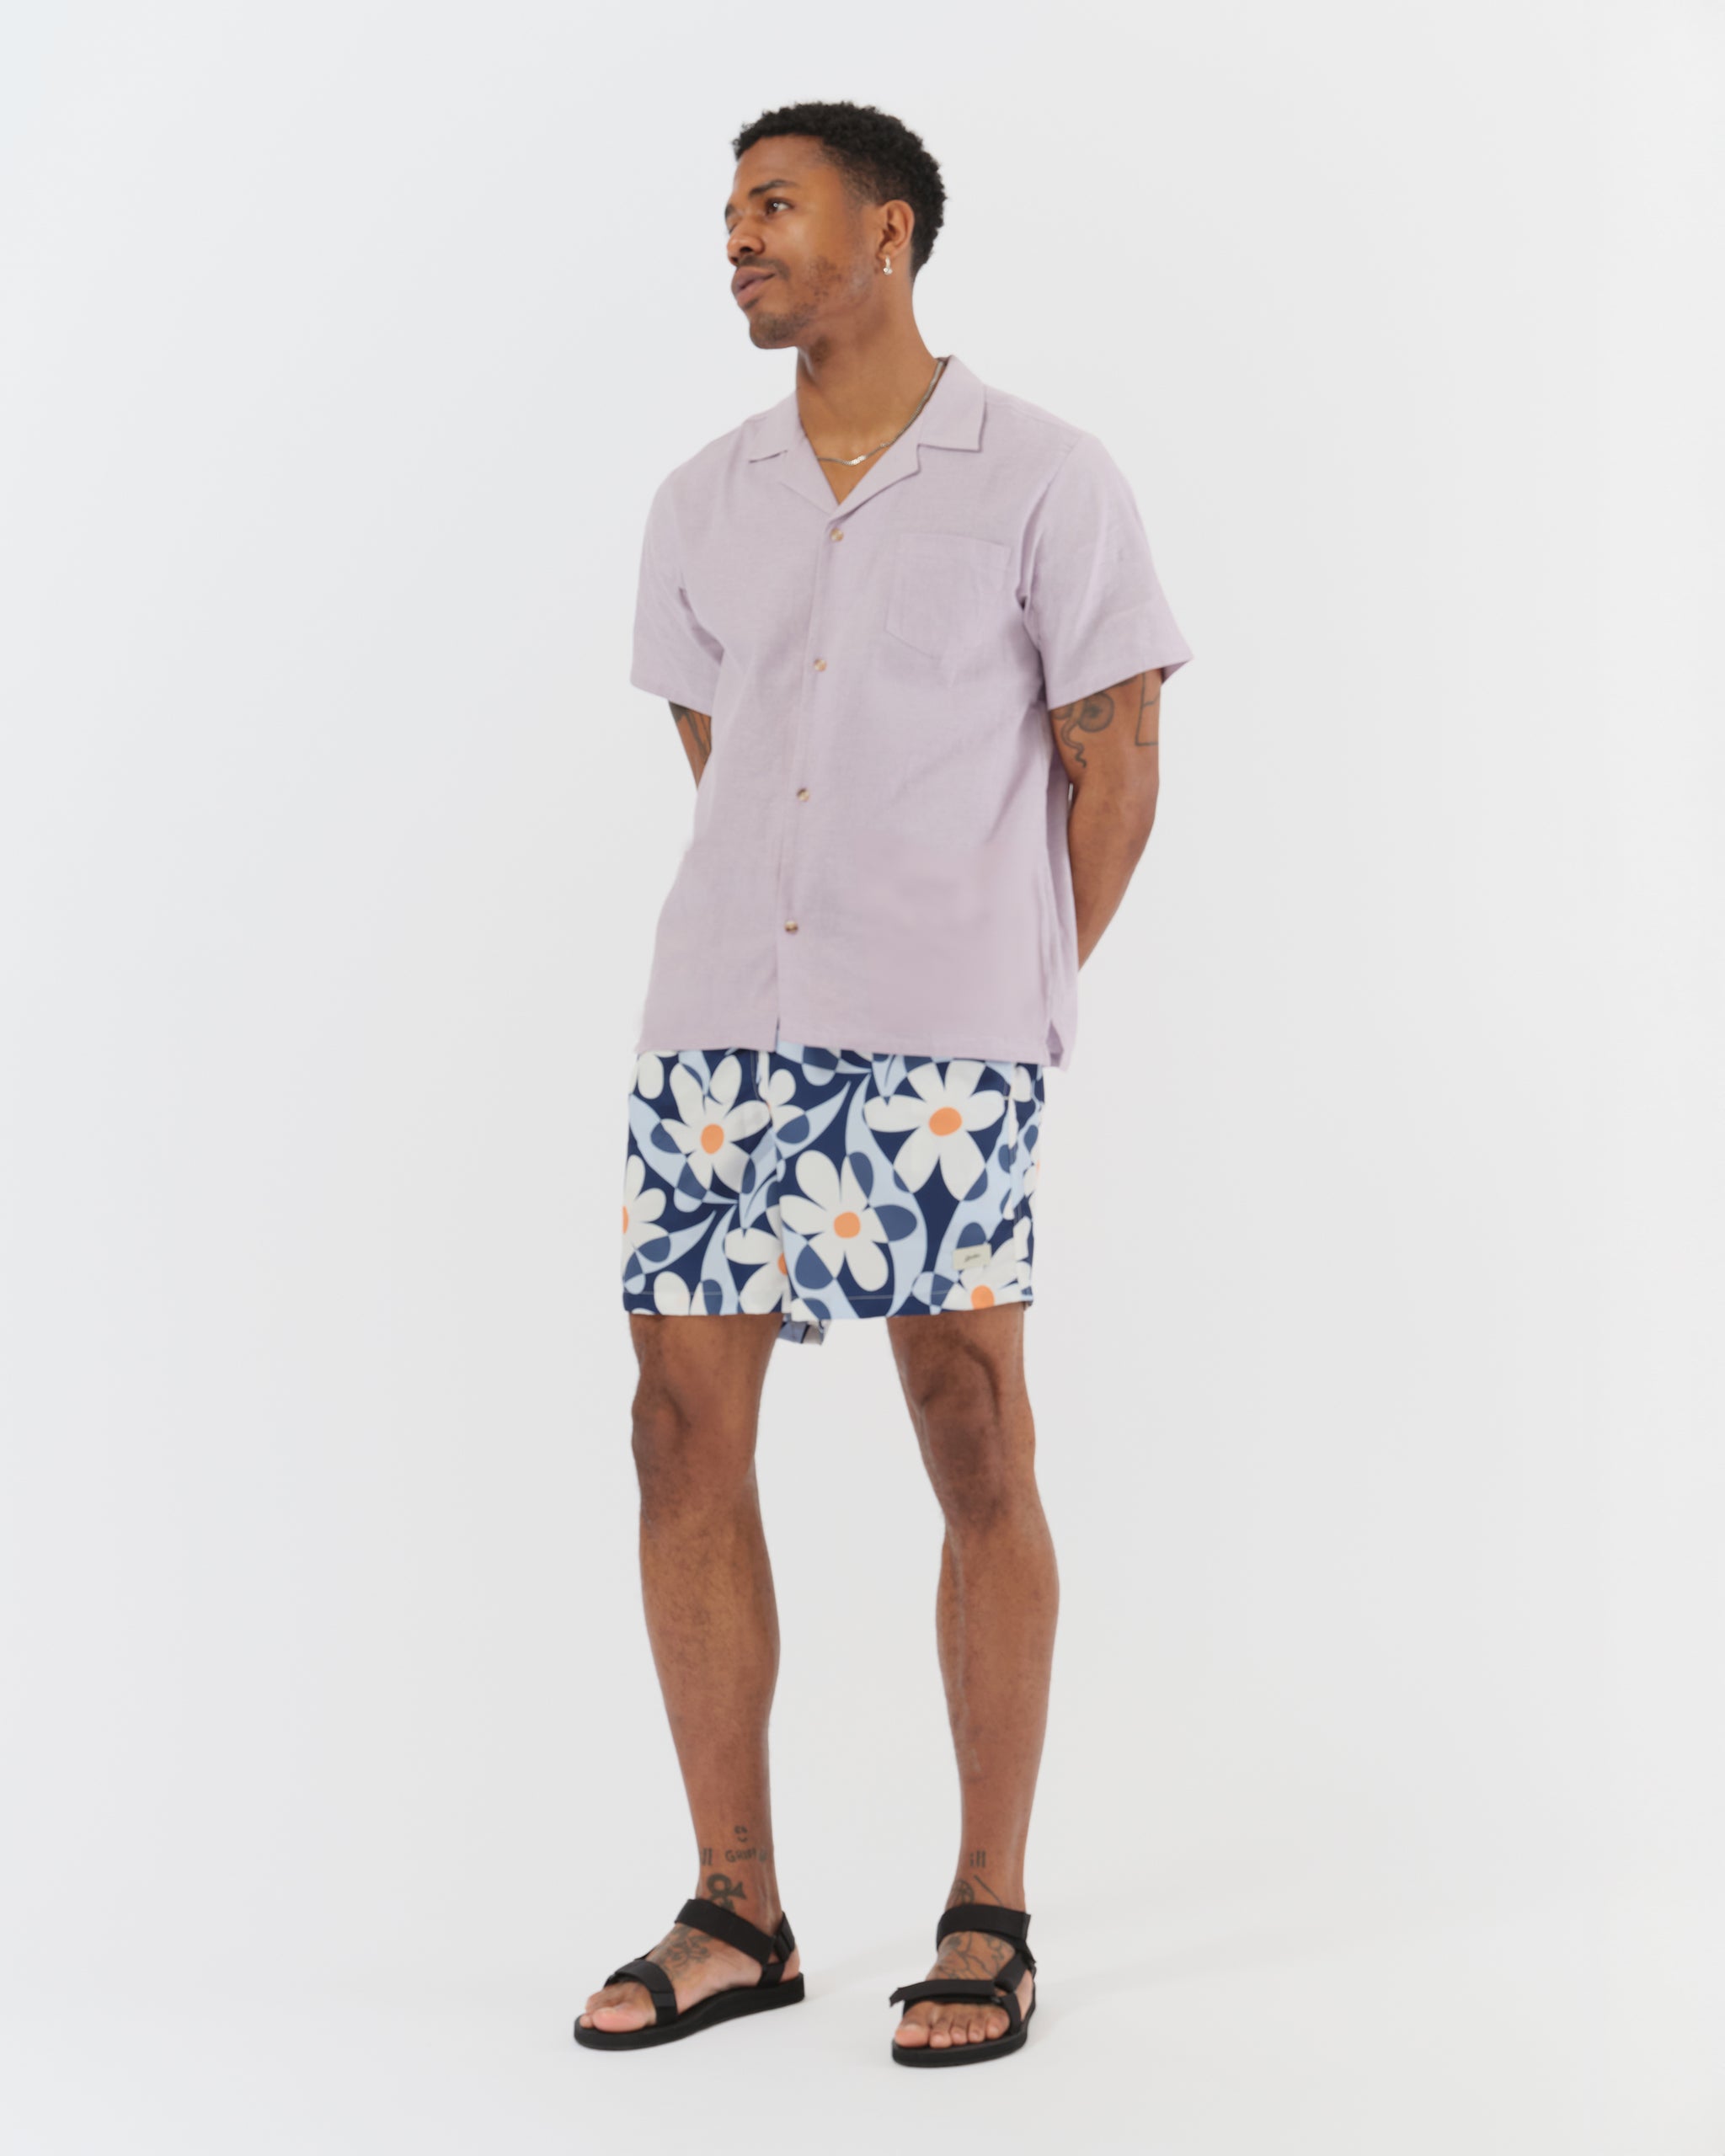 bather swim trunks with abstract daisy pattern on model